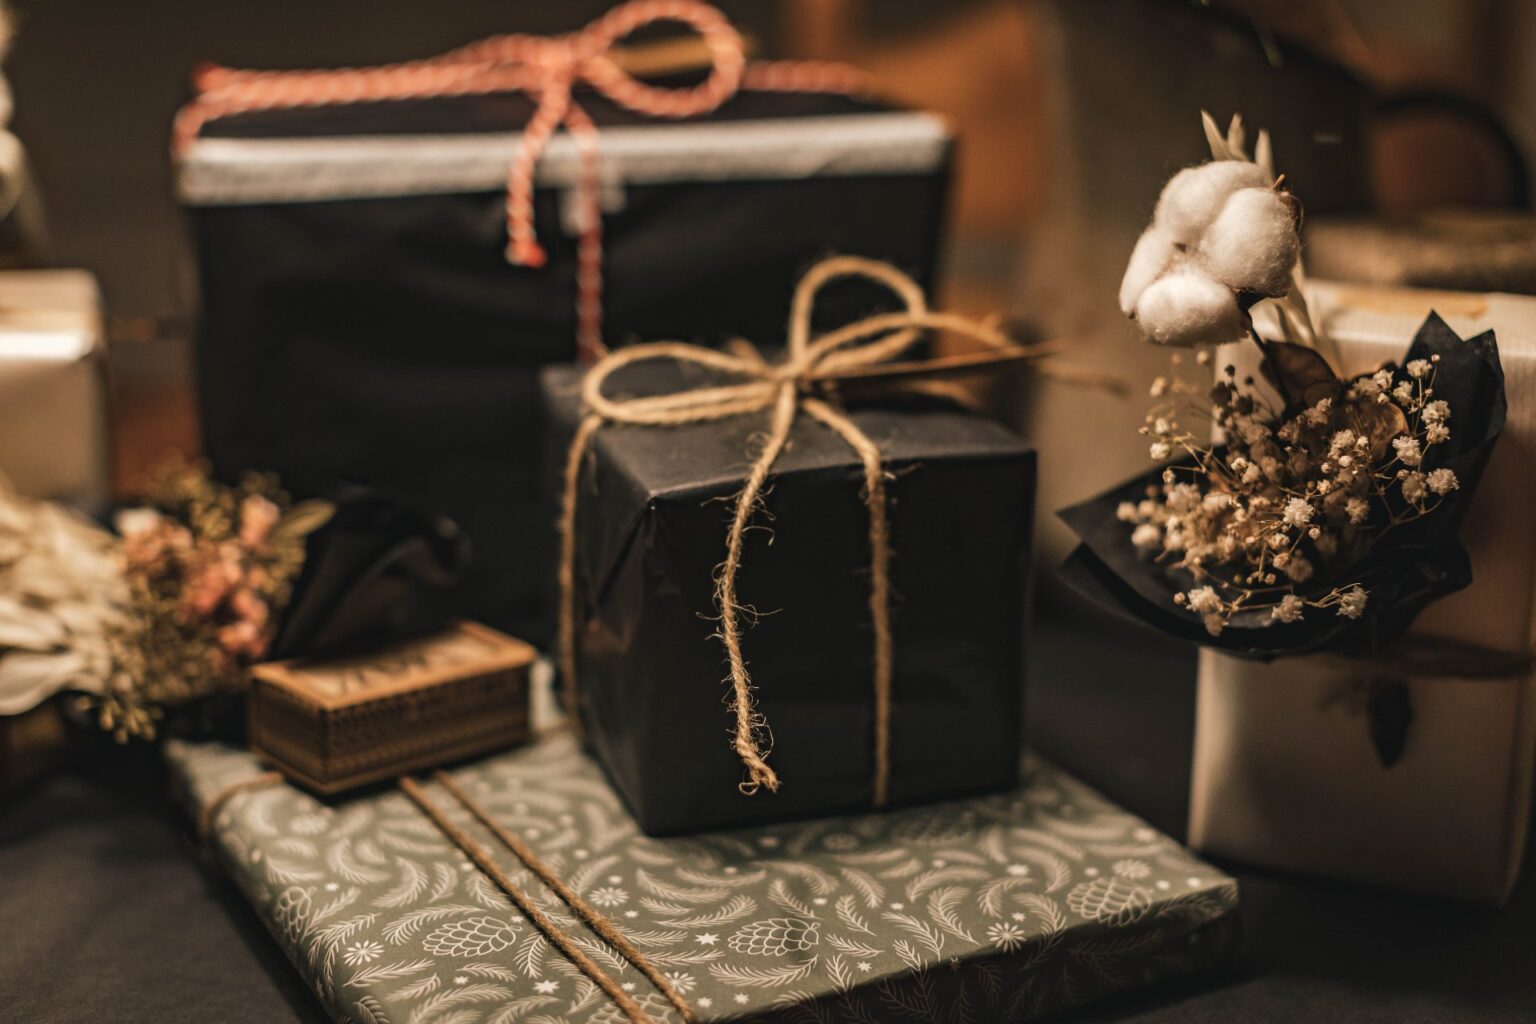 Picking out a gift can be tough. Here are some creative gift ideas to consider when you want to get somebody something for the Letterbox.